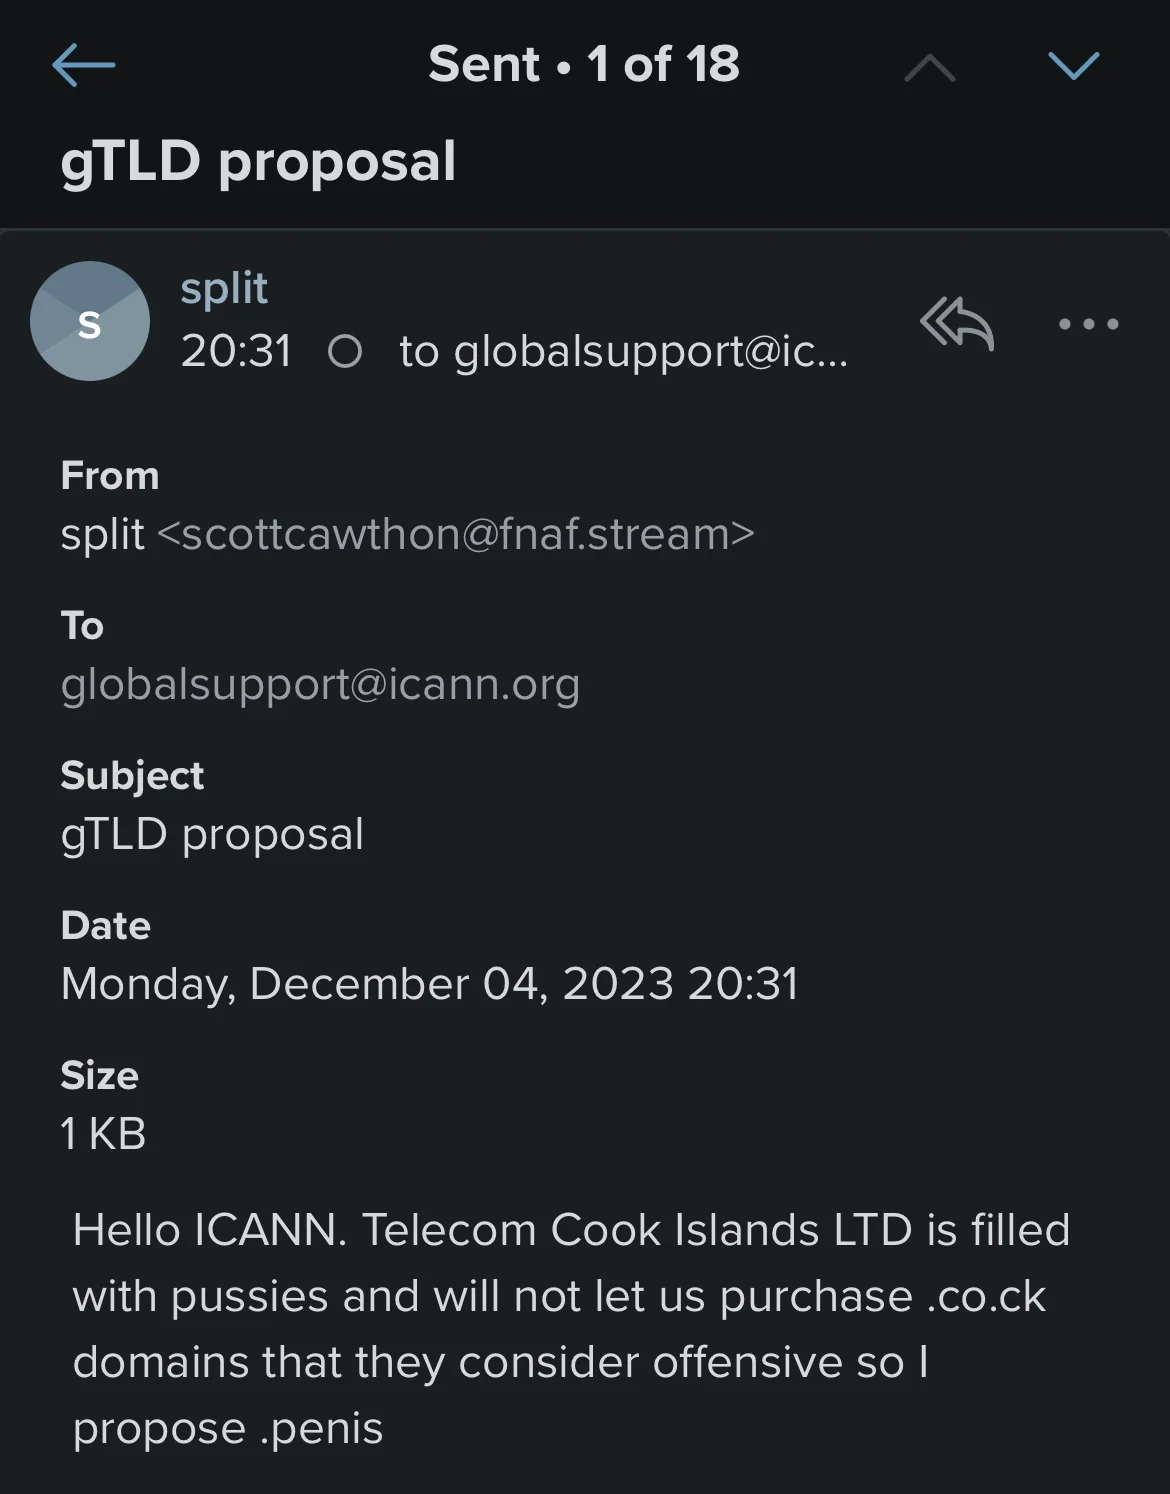 gTLD proposal to globalsupport@icann.org: Hello ICANN. Telecom Cook Islands LTD is filled with pussies and will not let us purchase .co.ck domains that they consider offensive so I propose .penis